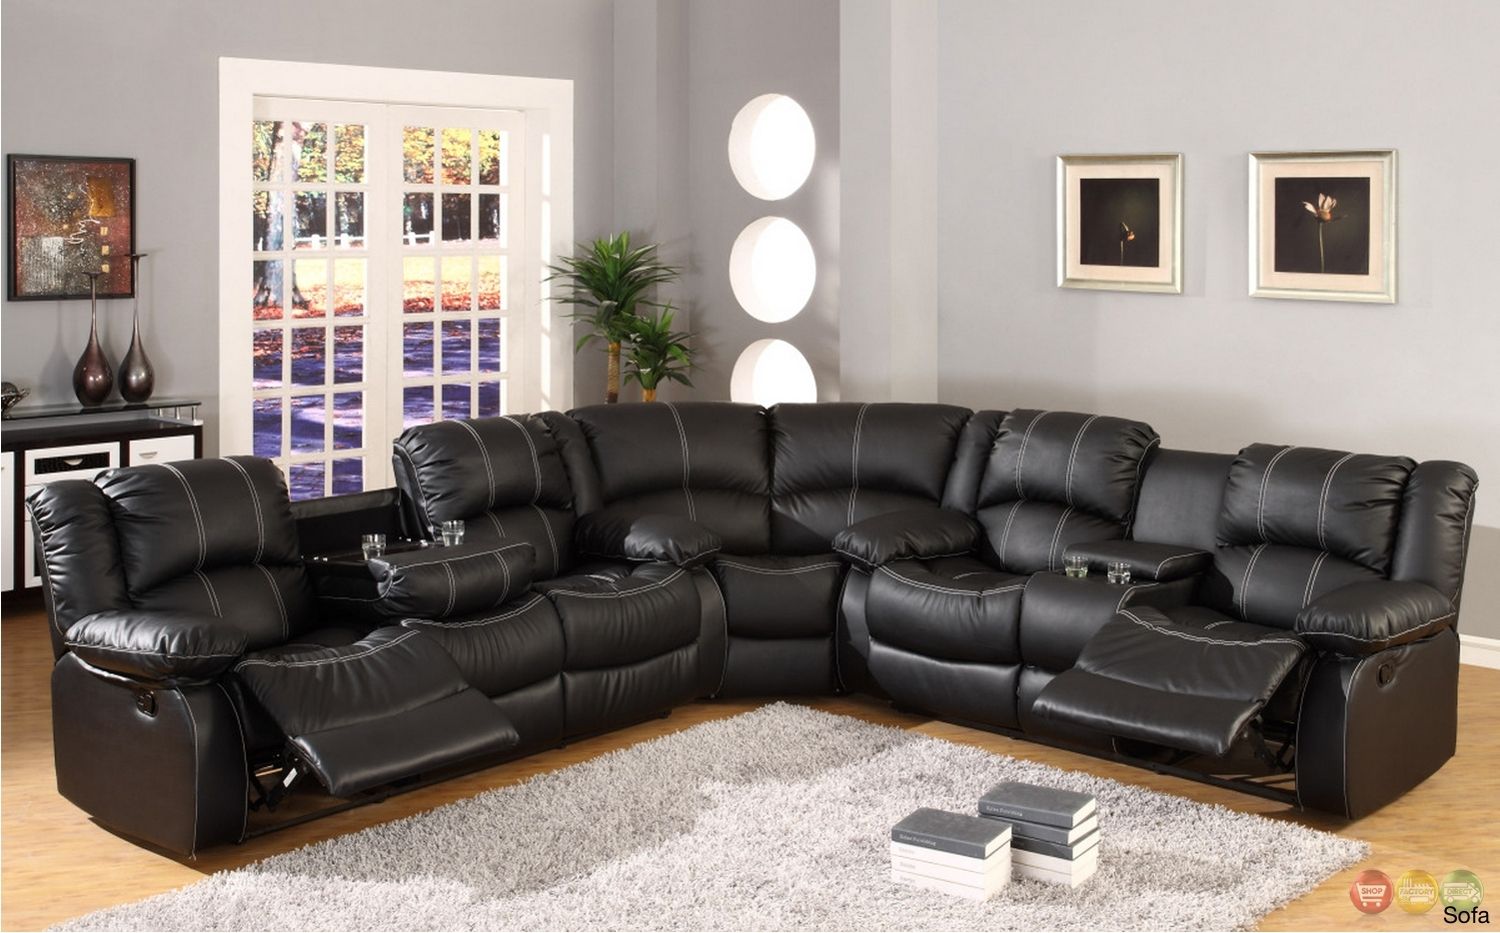 Astonishing Leather Motion Sectional Sofa 24 For Your Media Room Intended For Leather Motion Sectional Sofas (View 4 of 10)